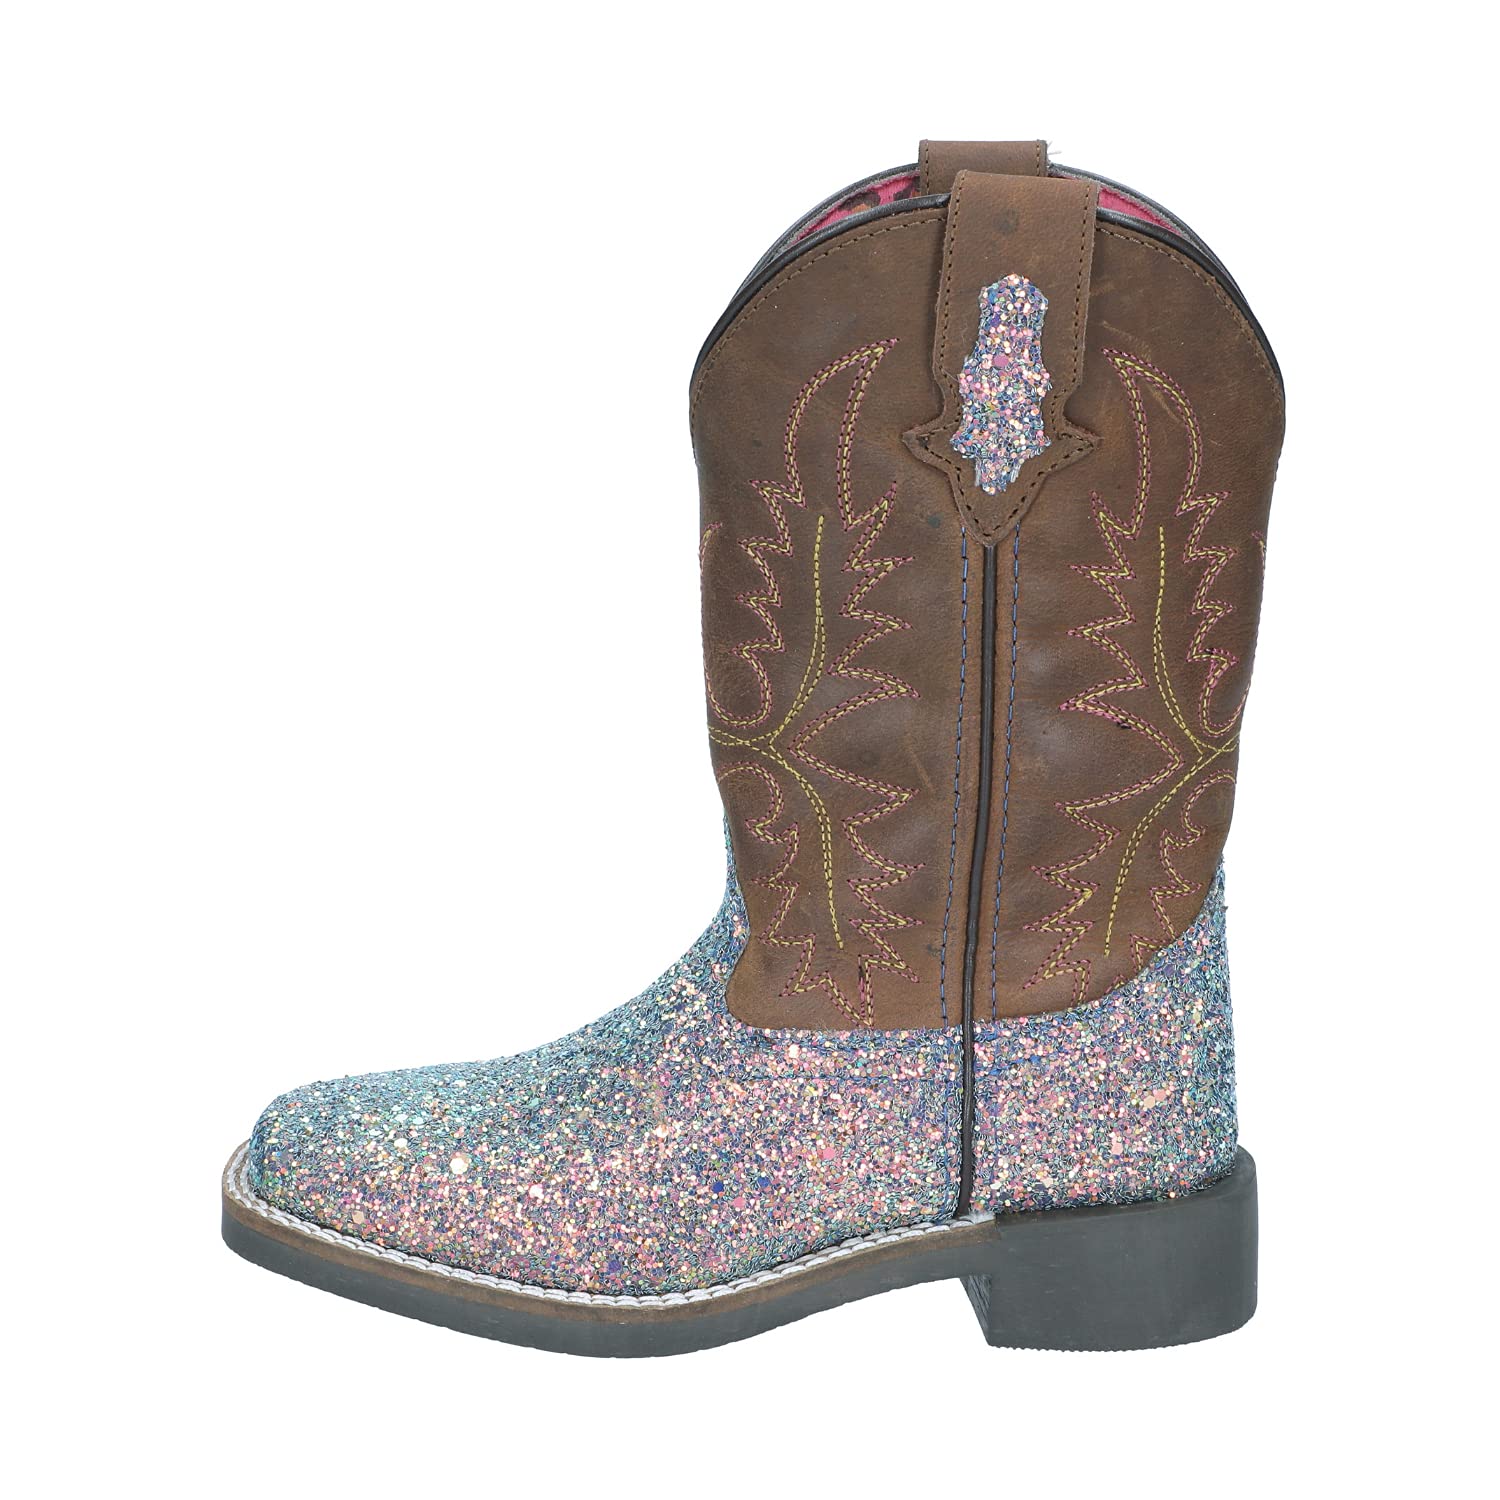 Smoky Mountain Boots | Ariel Series | Youth Western Boot | Square Toe | Genuine Leather | Glitter Foot | TPR Sole & Block Heel | Leather Shaft & Tricot Lining | Man-Made Trim